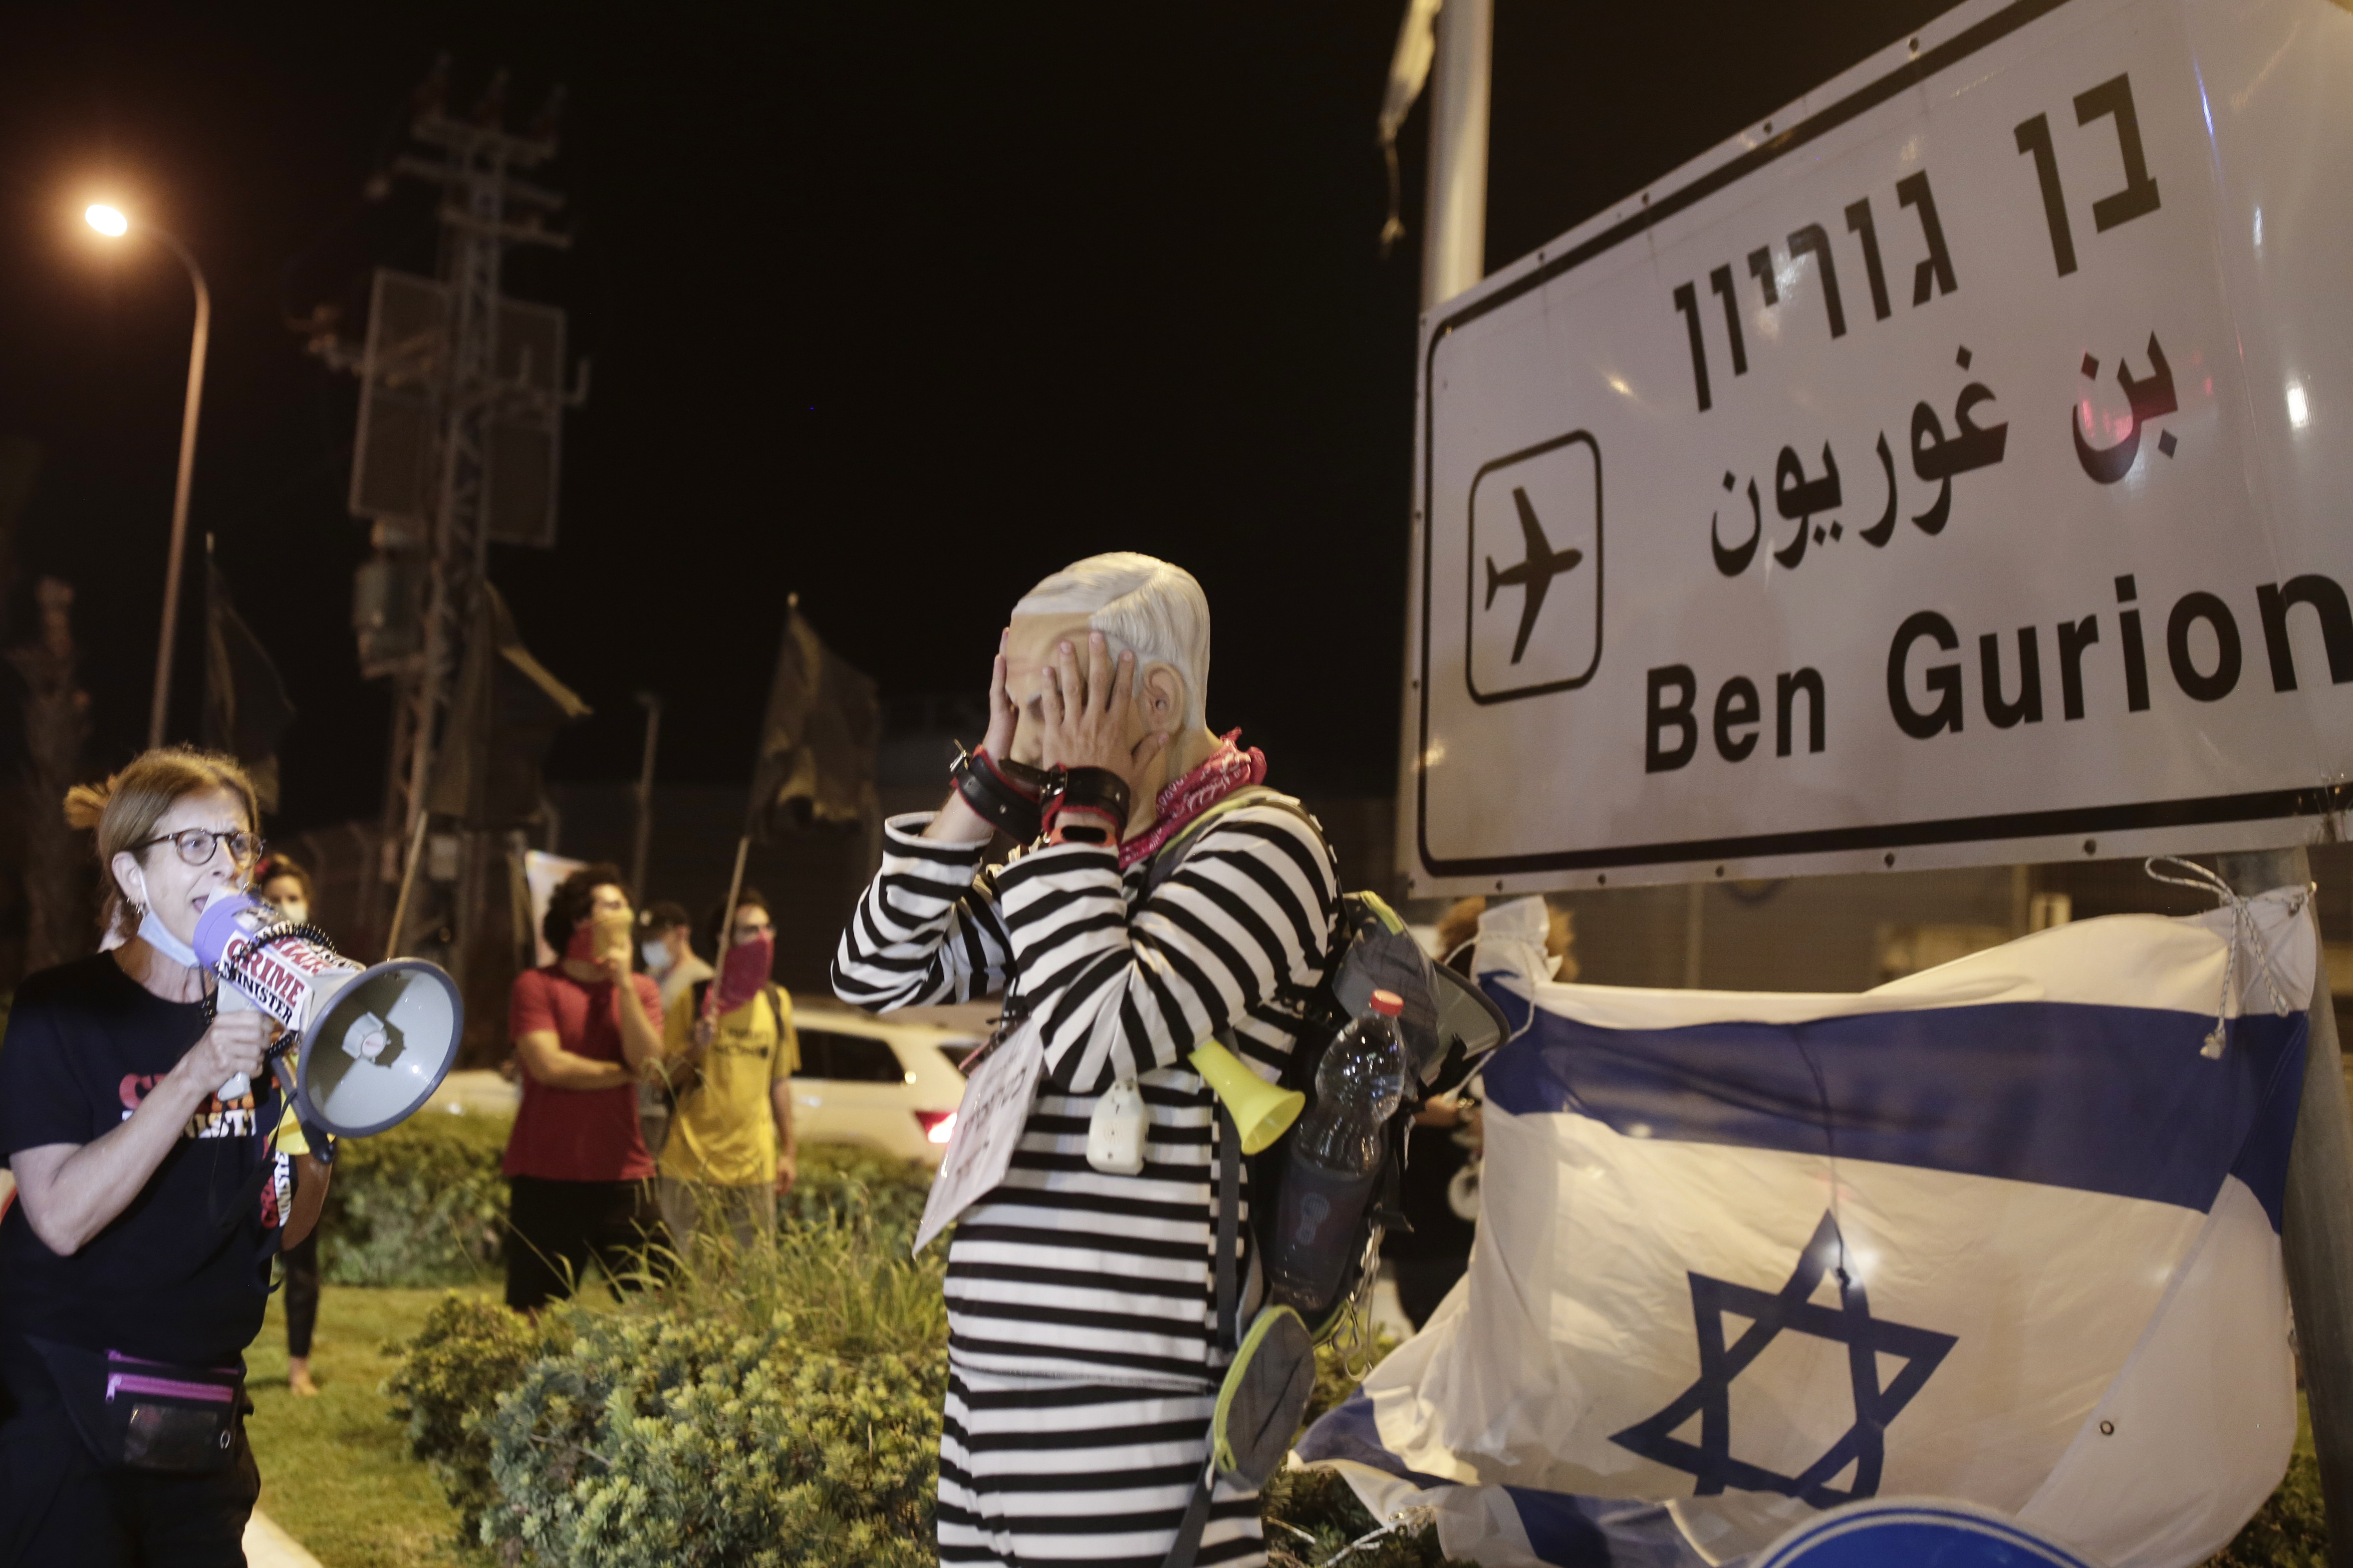 A protester wearing a rubber mask representing Israeli Prime Minister Benjamin Netanyahu stands at an entrance to Ben Gurion Airport, where Netanyahu and his family were expected to fly with an Israeli delegation to the U.S. for a ceremony with the United Arab Emirates, in Tel Aviv, Sunday, Sept. 13, 2020. (AP Photo/Maya Alleruzzo)